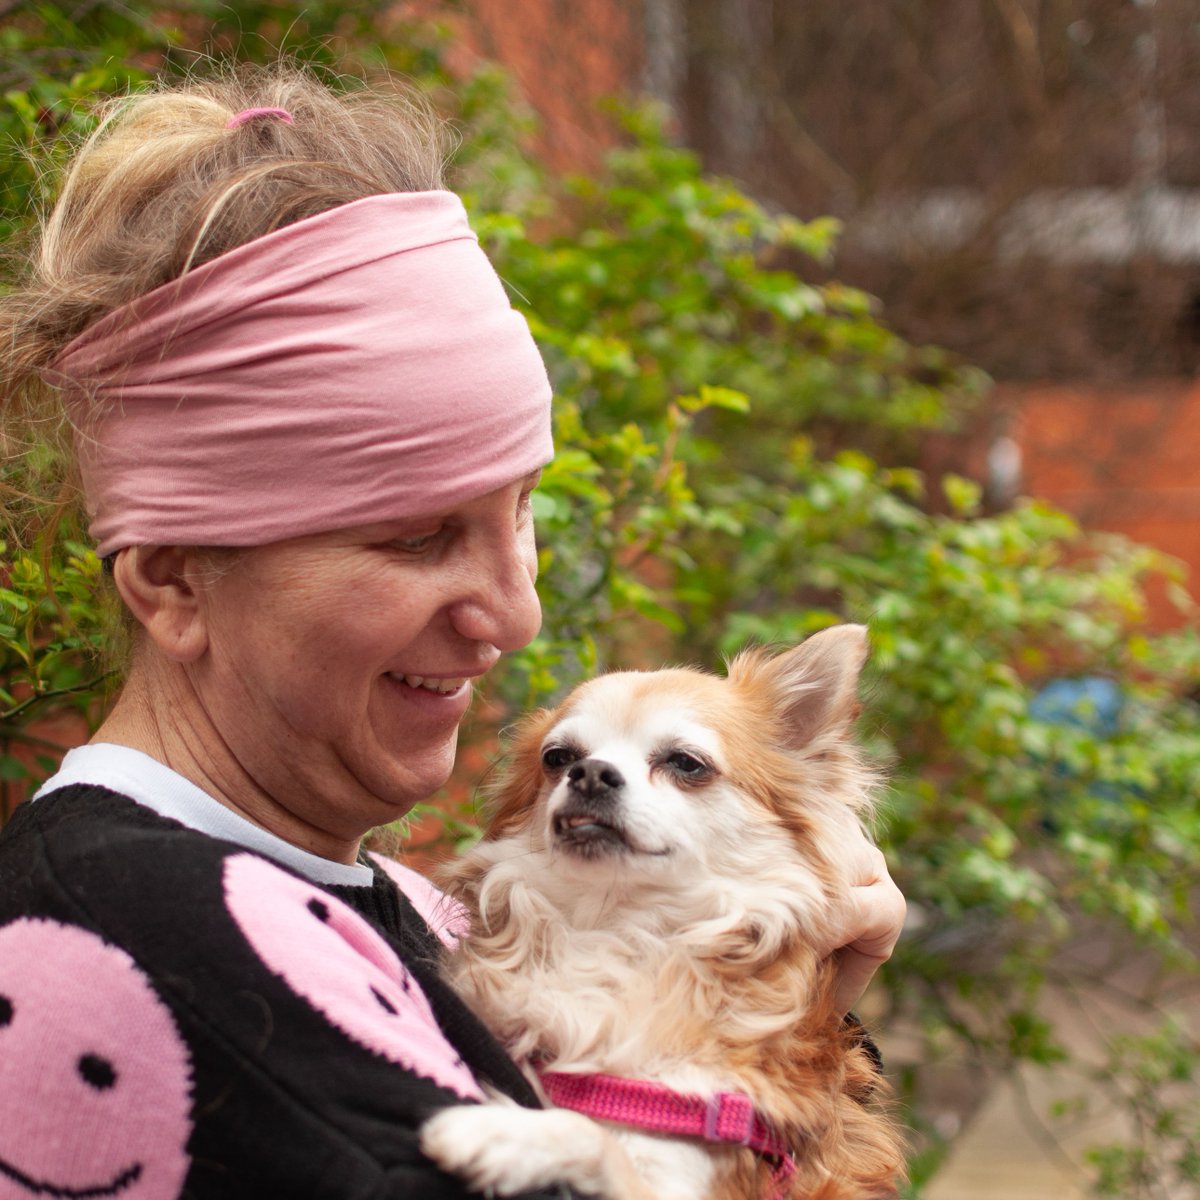 Did you know? 86% of people experiencing homelessness rely on their pets for support. No accommodation would accept Nicky with Foxy, but she couldn't be without him. This #NationalPetMonth, support vital services caring for people and their pets 👉 action.mungos.org/pets-social